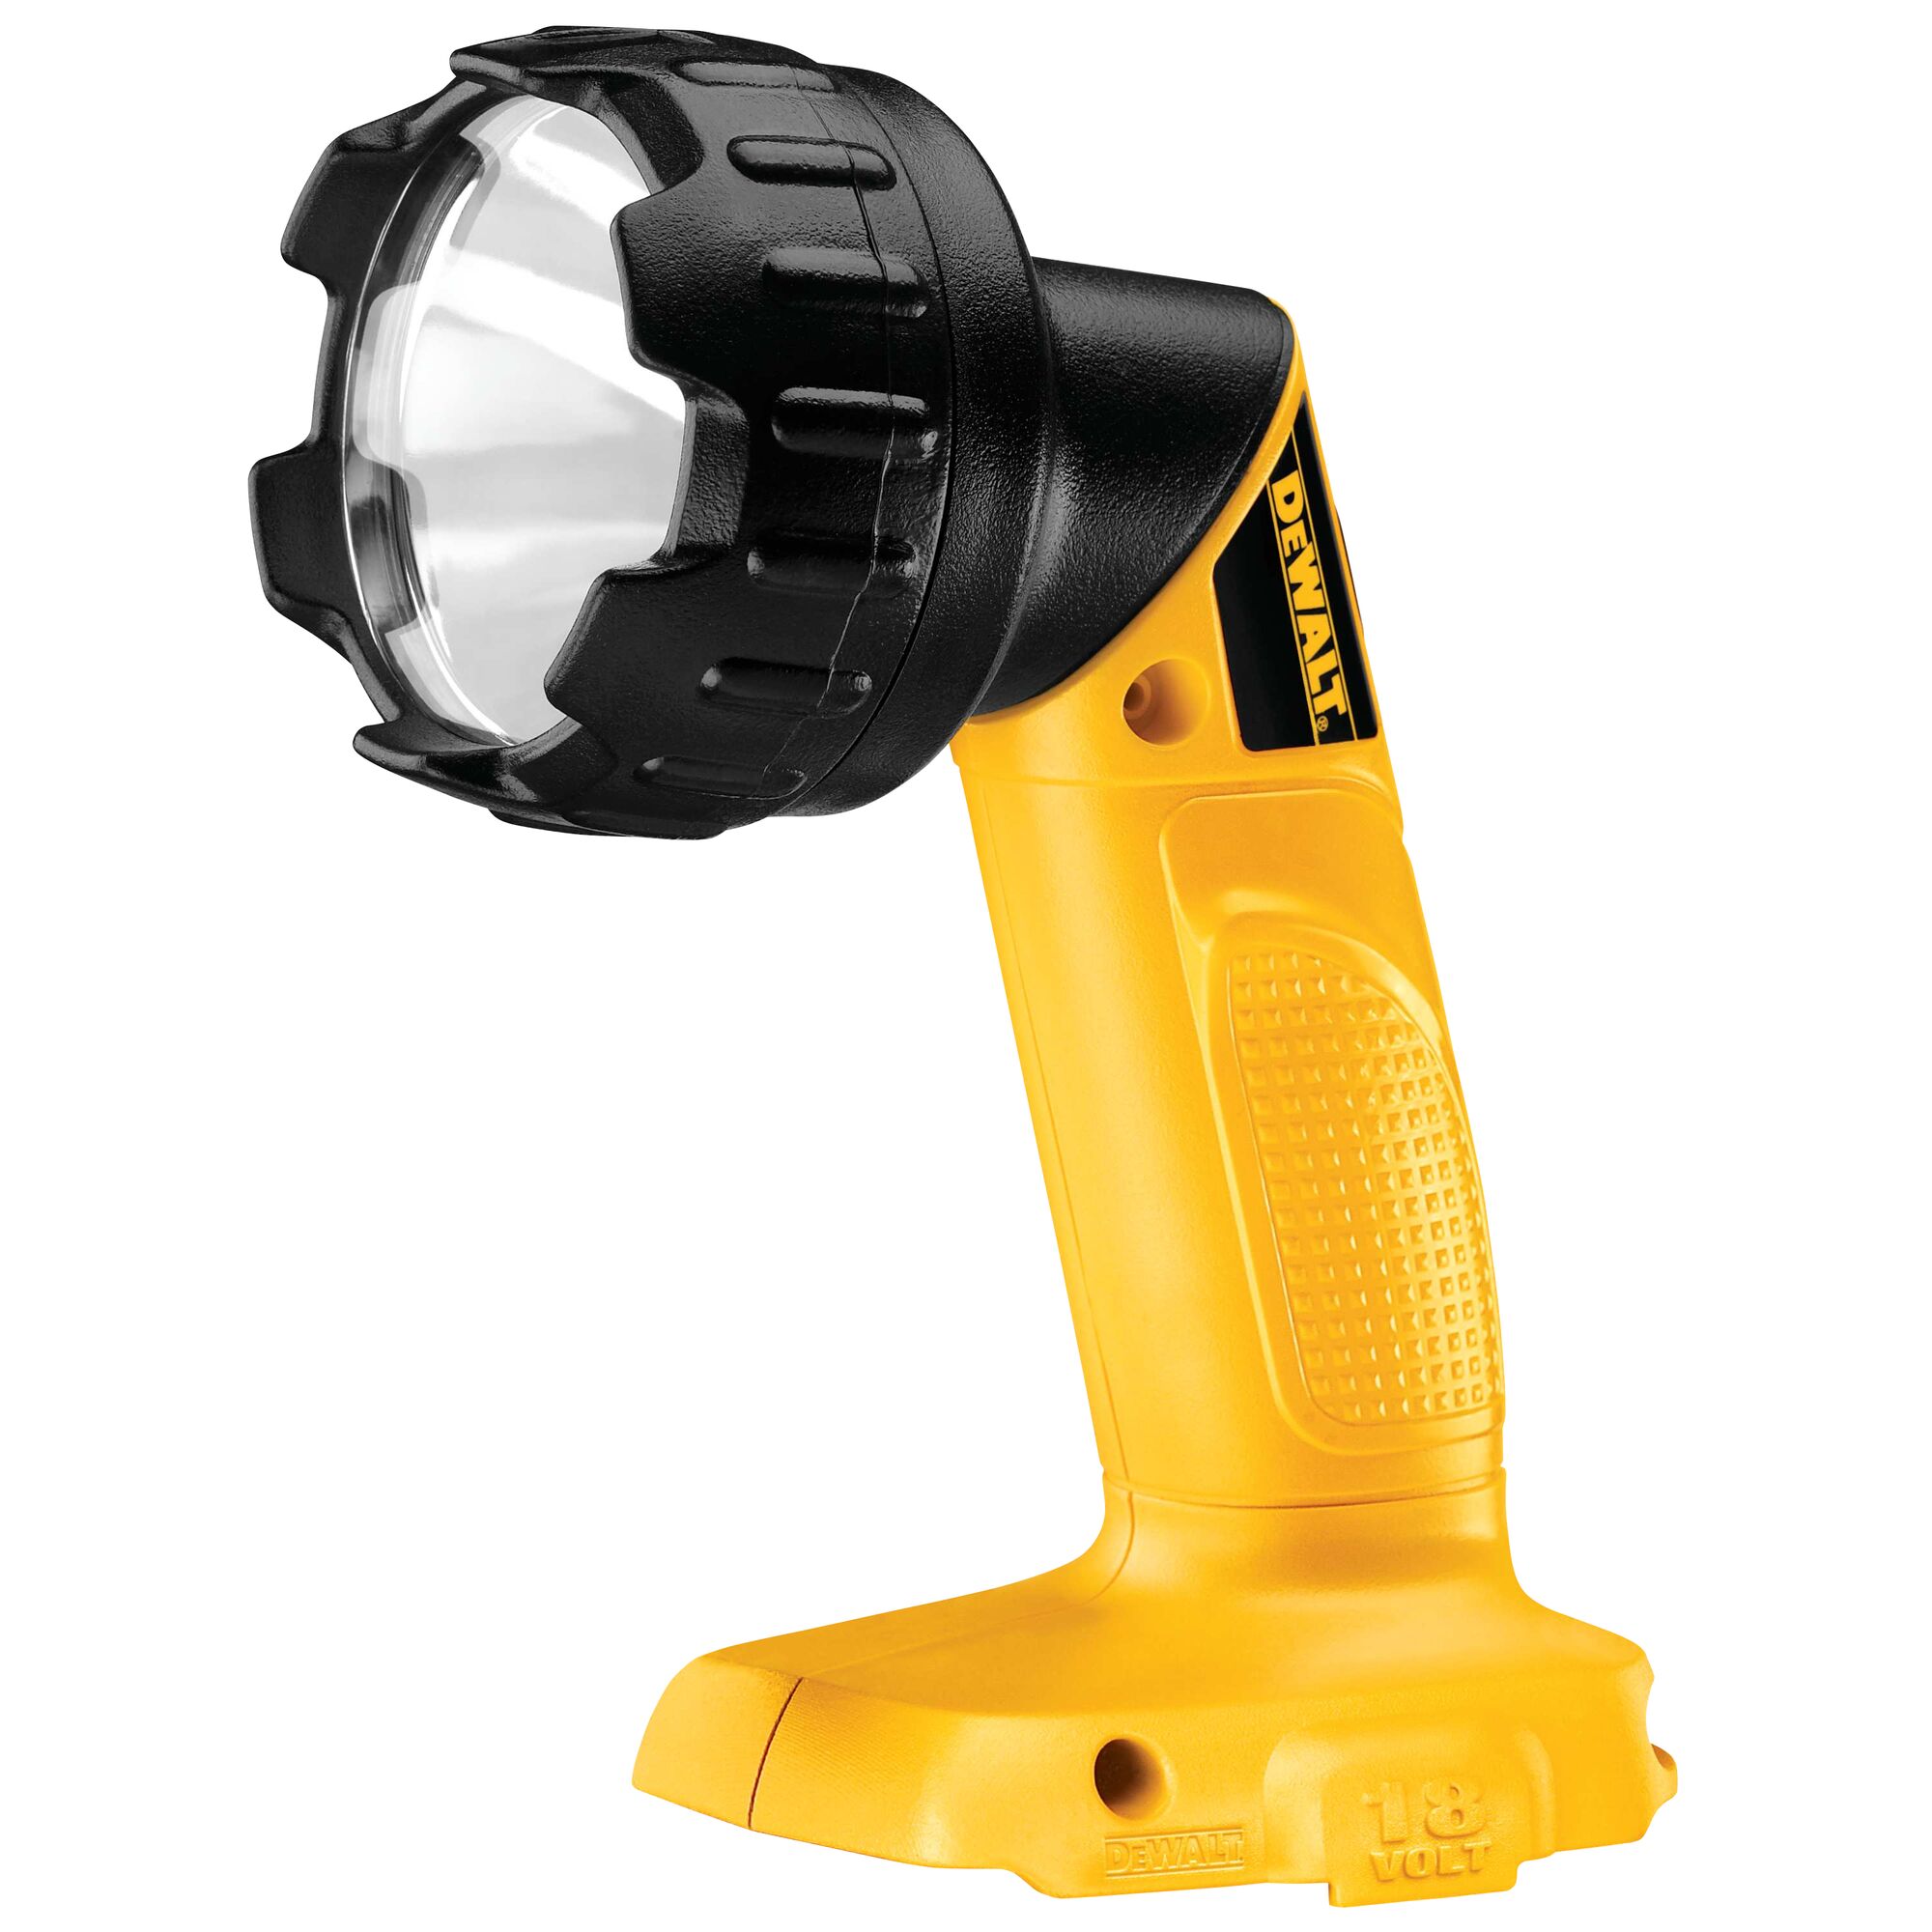 DeWalt DW908 18V Pivoting Head Flashlight Details about   NEW Bare Tool only 